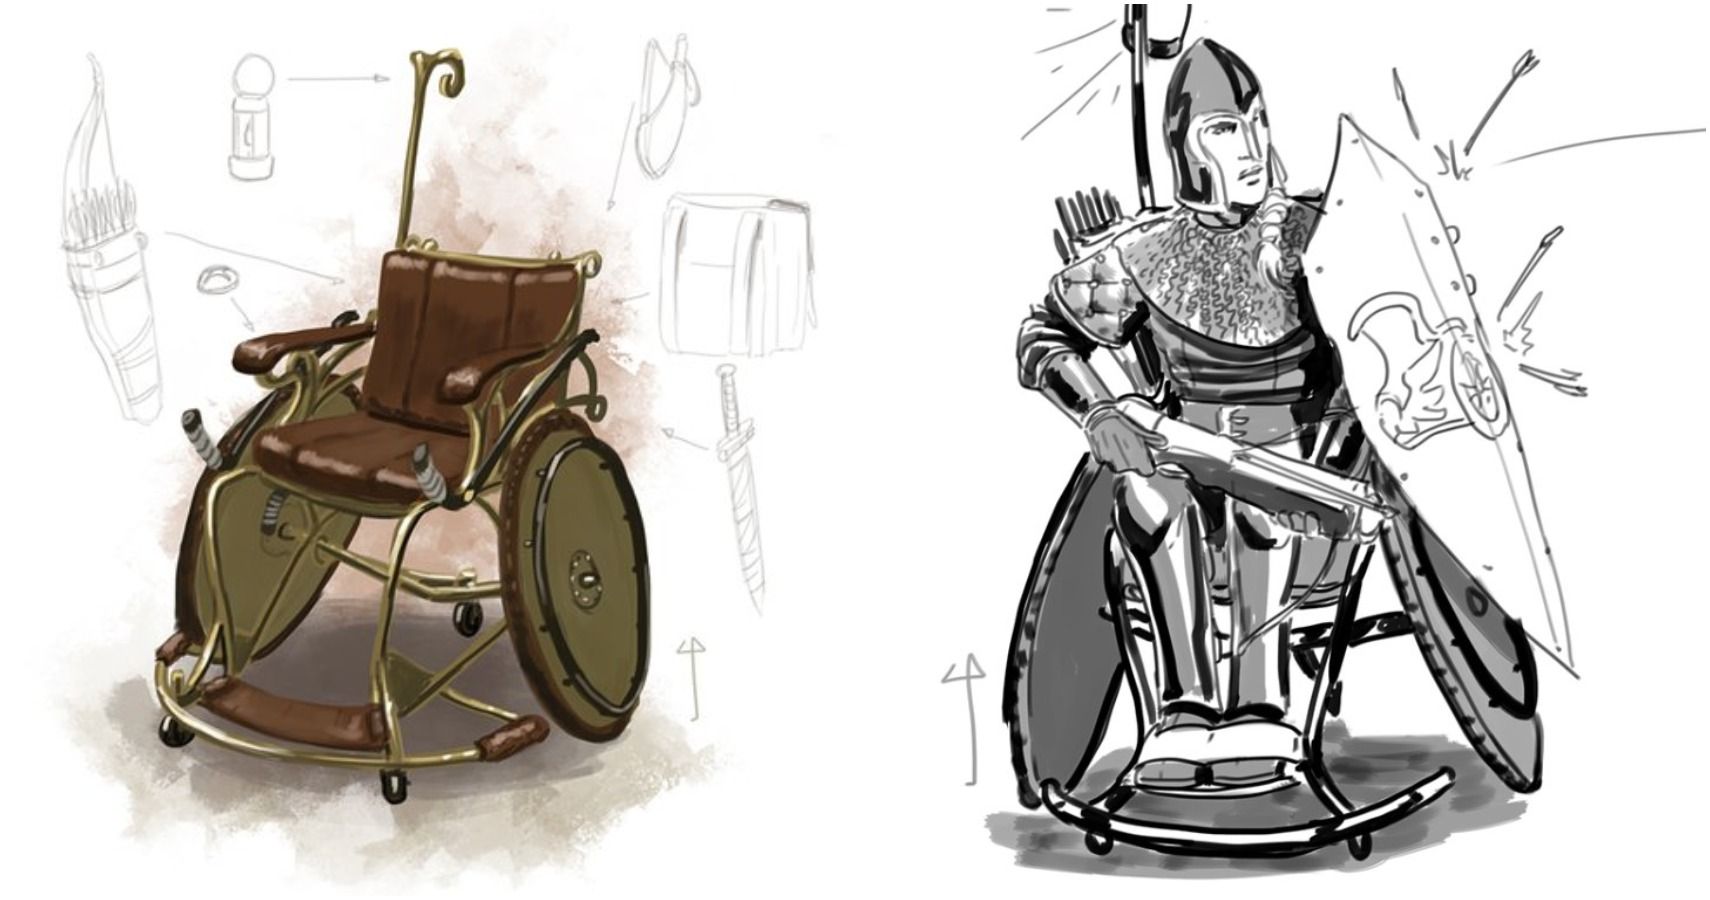 Disability Advocate Creates D&D Combat Wheelchair, People Can’t Be Cool About It